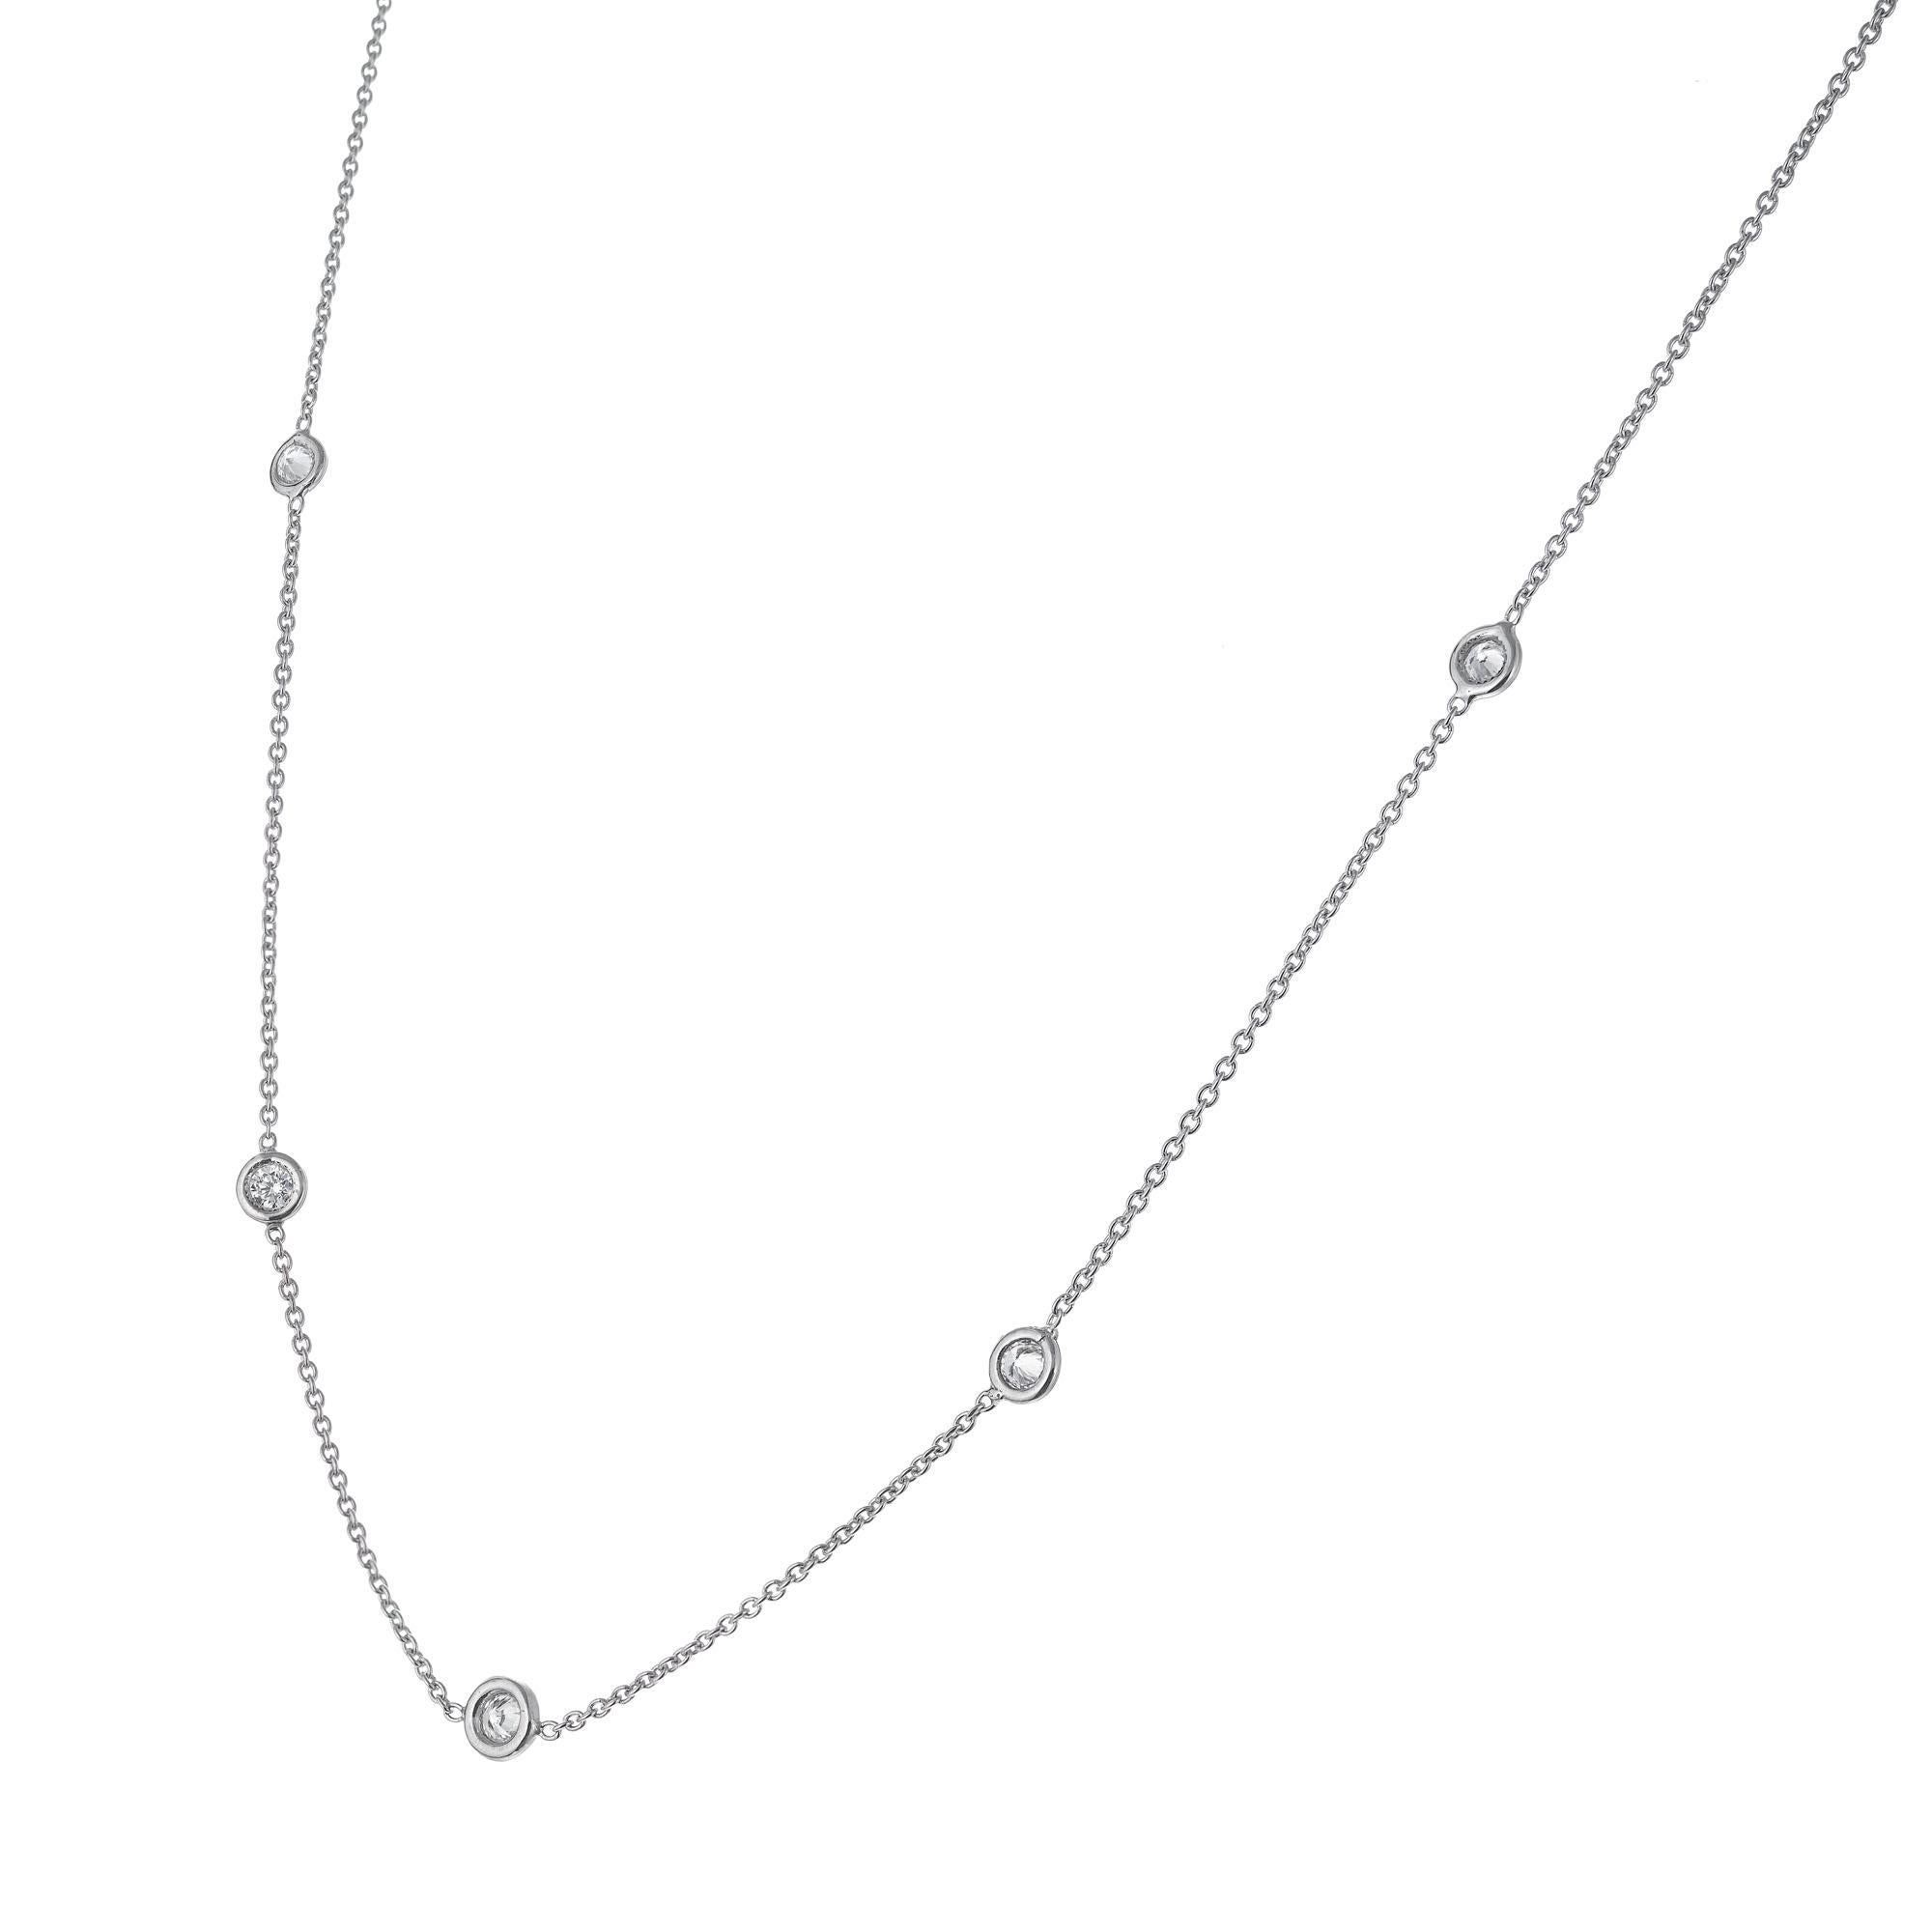 Diamond by the yard, nine round bezel set diamonds 18k white gold 16 inch necklace.

9 round brilliant cut diamonds G-H, VS approx. .81cts
18k white gold 
Stamped: 18k Italy
2.6 grams
Chain: 16 Inches
Width: 3.3mm
Thickness/depth: 1.5mm

